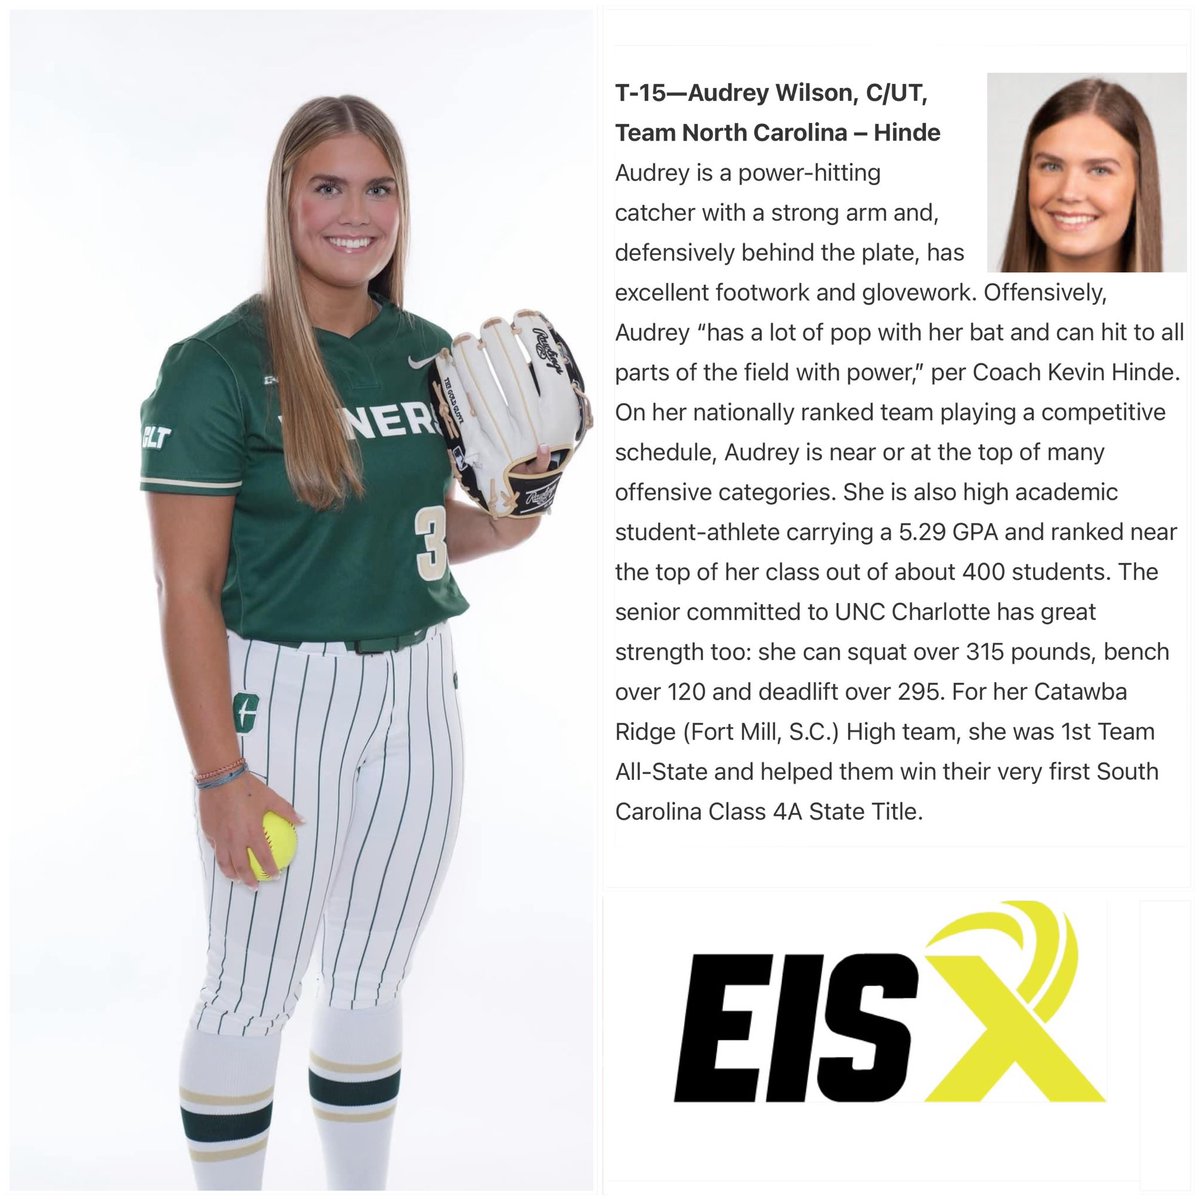 Congratulations to @CharlotteSB commit @AWilson2024 for earning the #15 spot in the 2024 Extra Elite 100 national rankings by @ExtraInningSB! Way to go Audrey!! #TeamNC